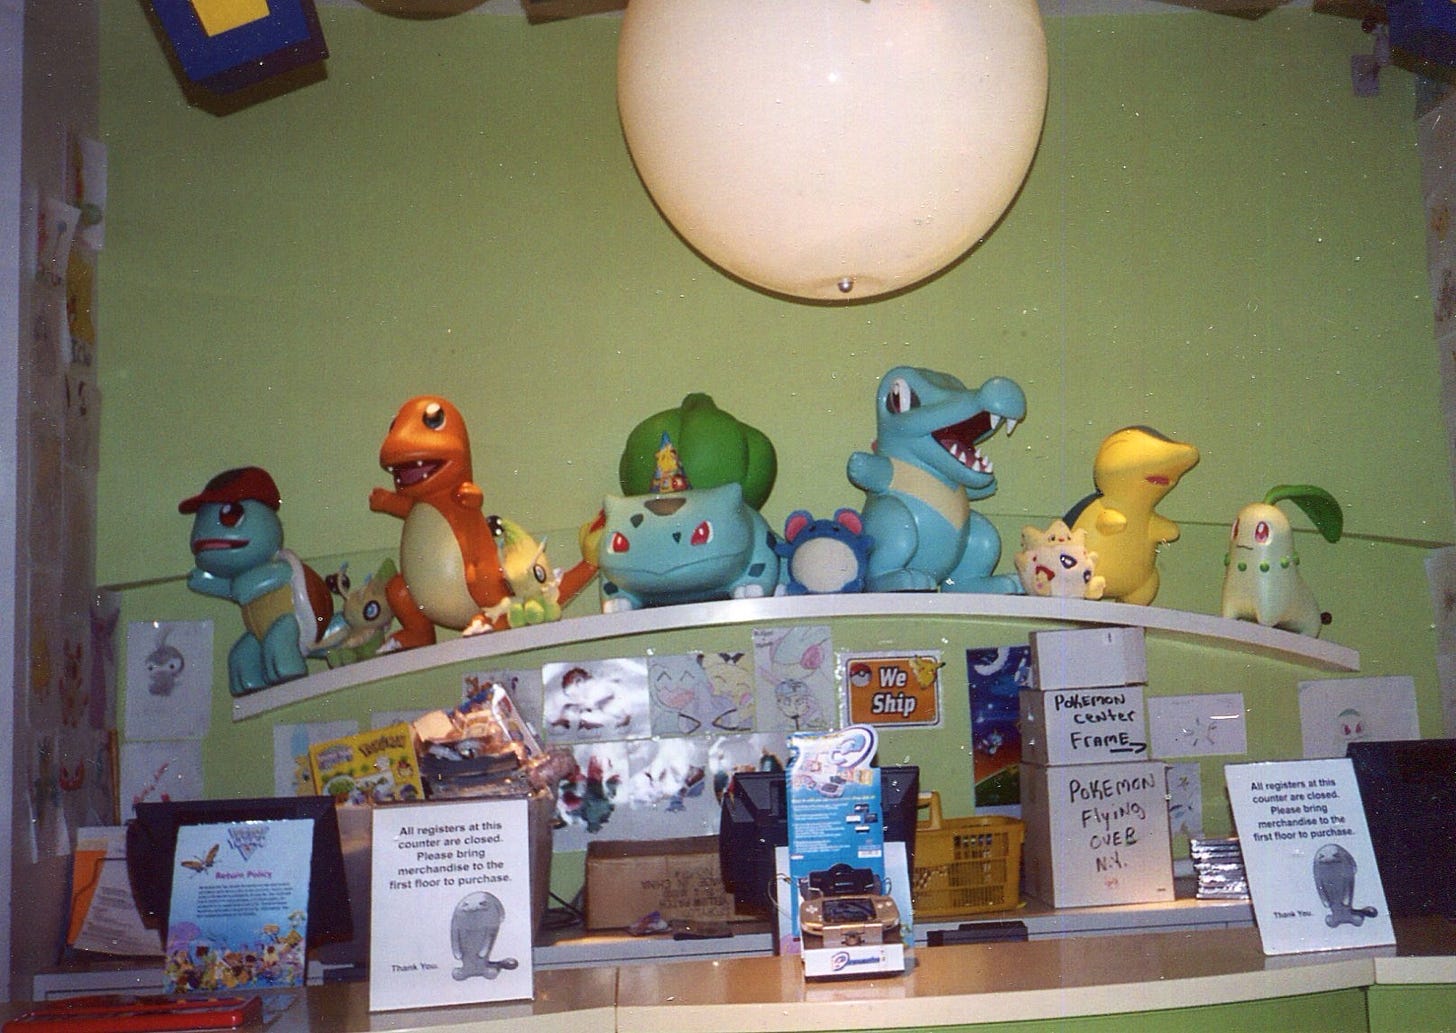 A photograph of one of the checkouts in the Pokémon Center New York, featuring a selection of starter Pokémon from the series.